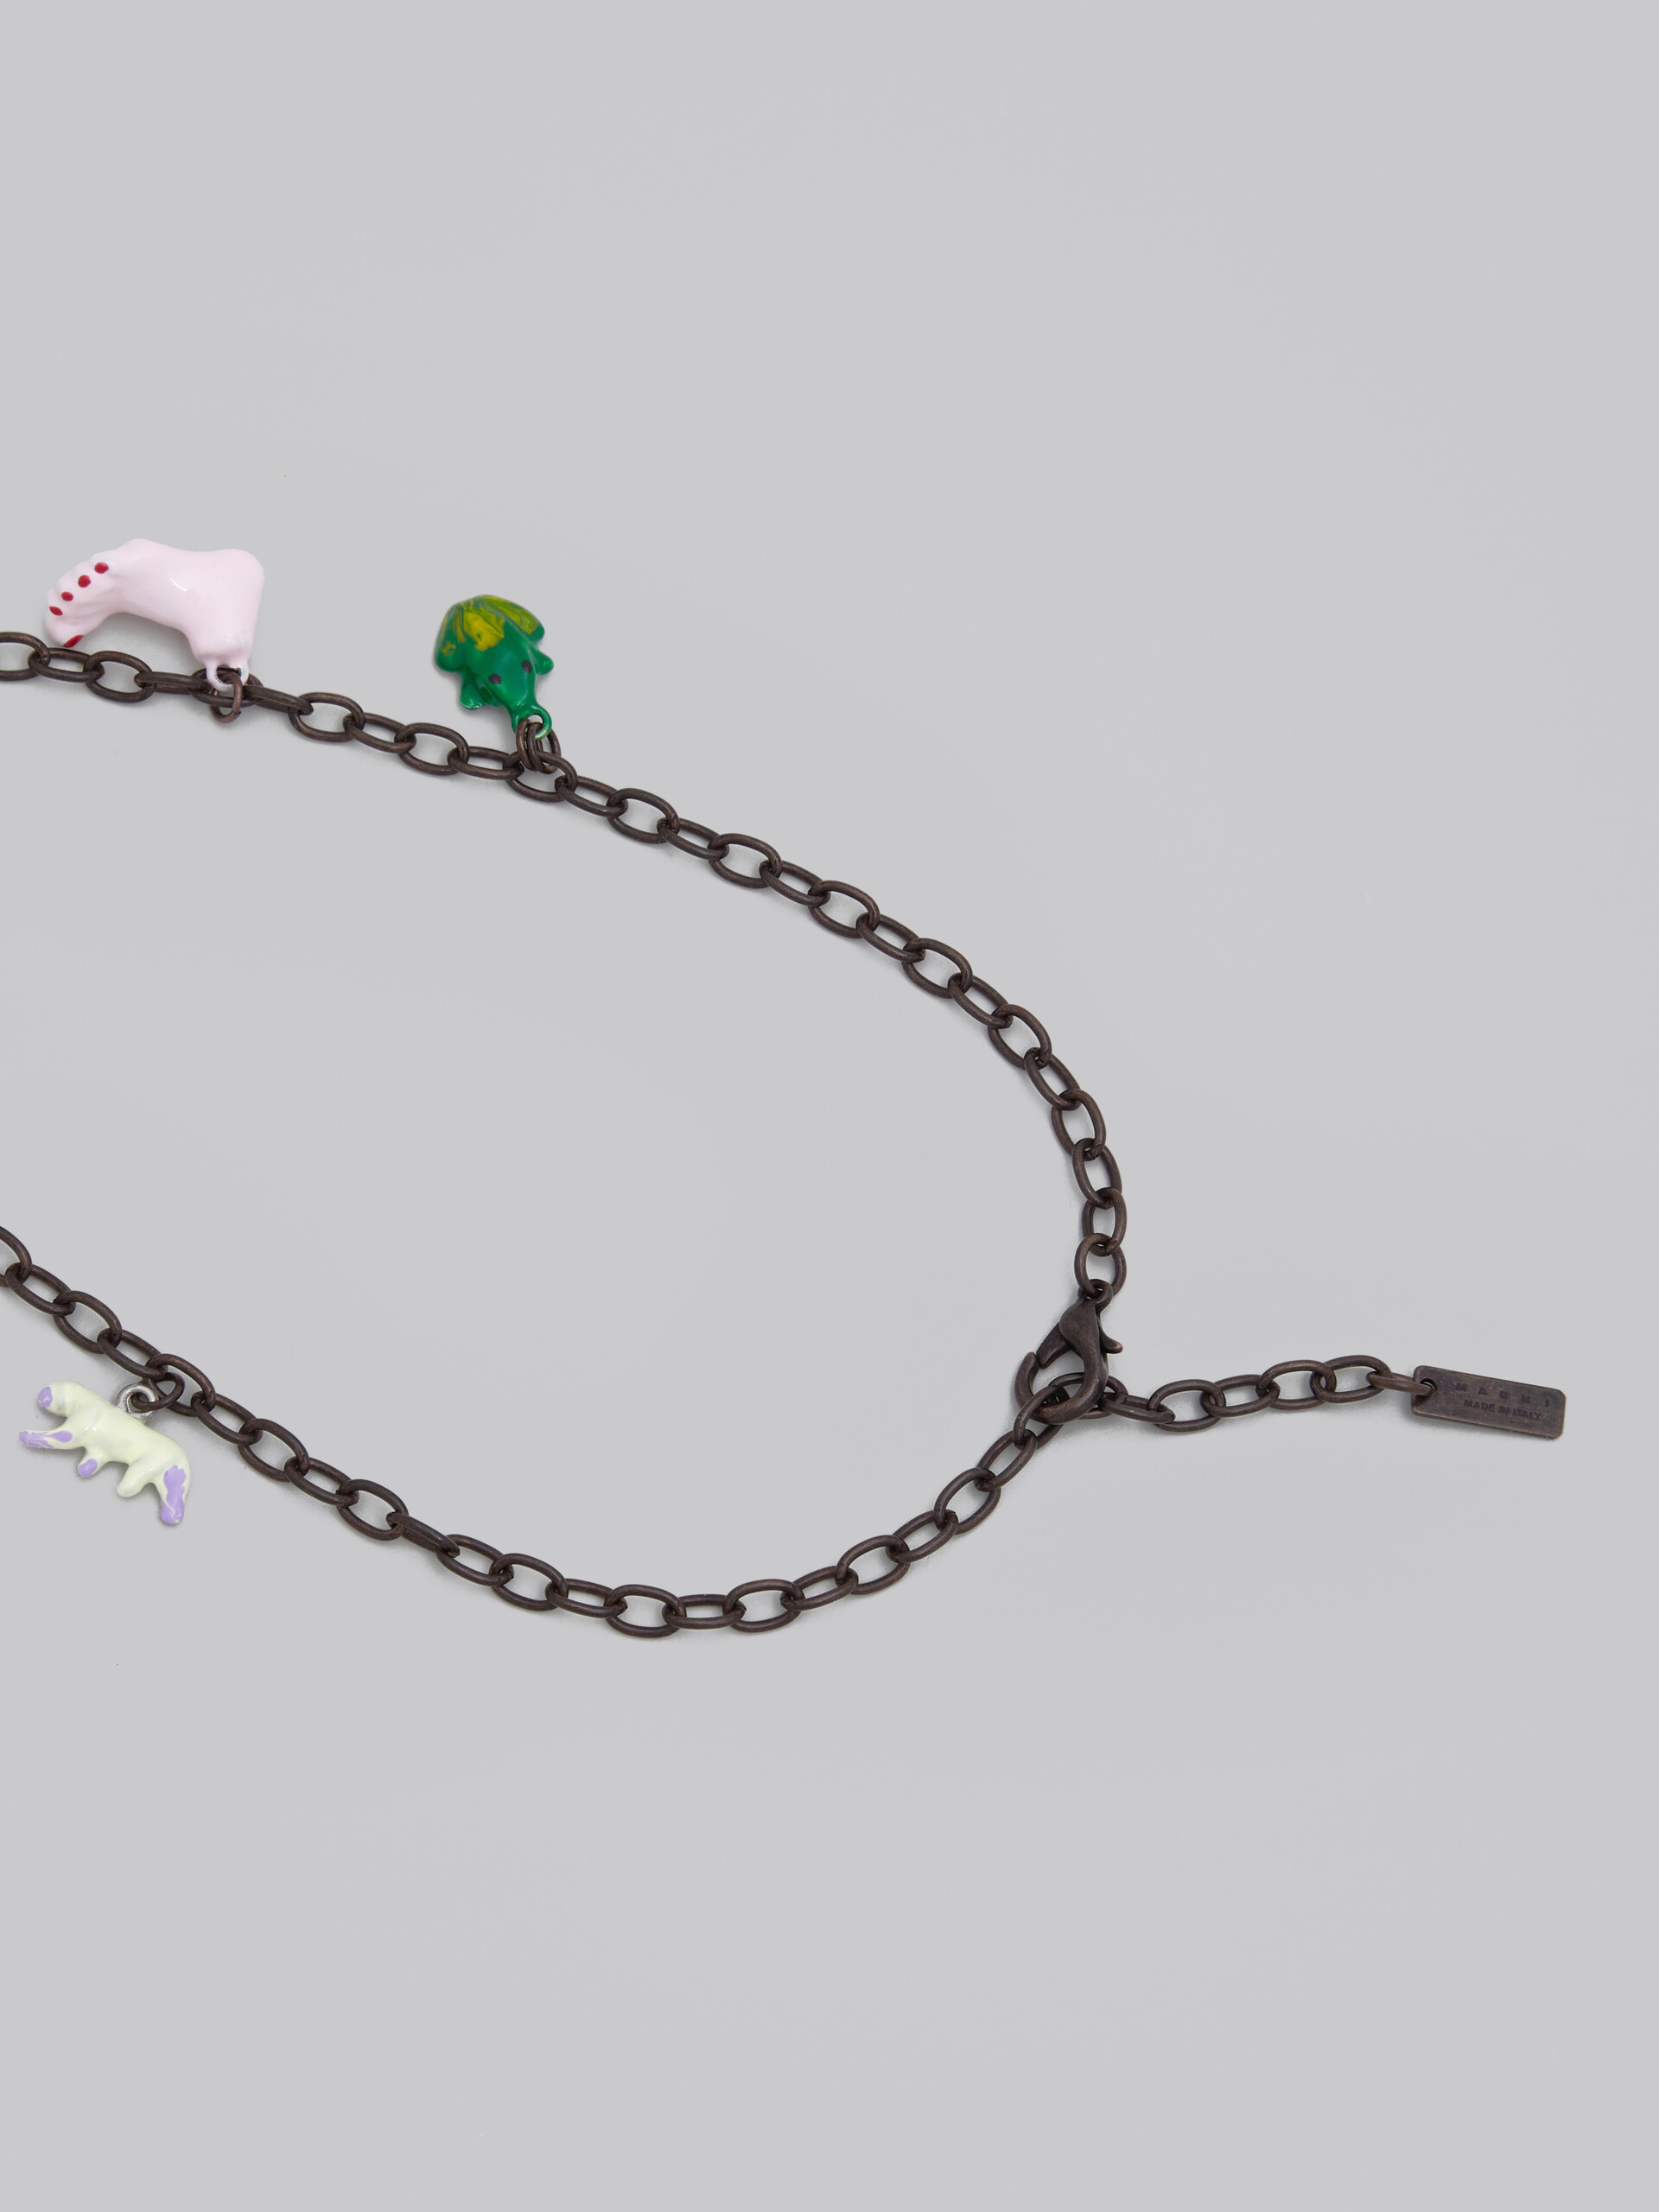 Marni x No Vacancy Inn - Necklace with green pink and yellow pendants - Necklaces - Image 3